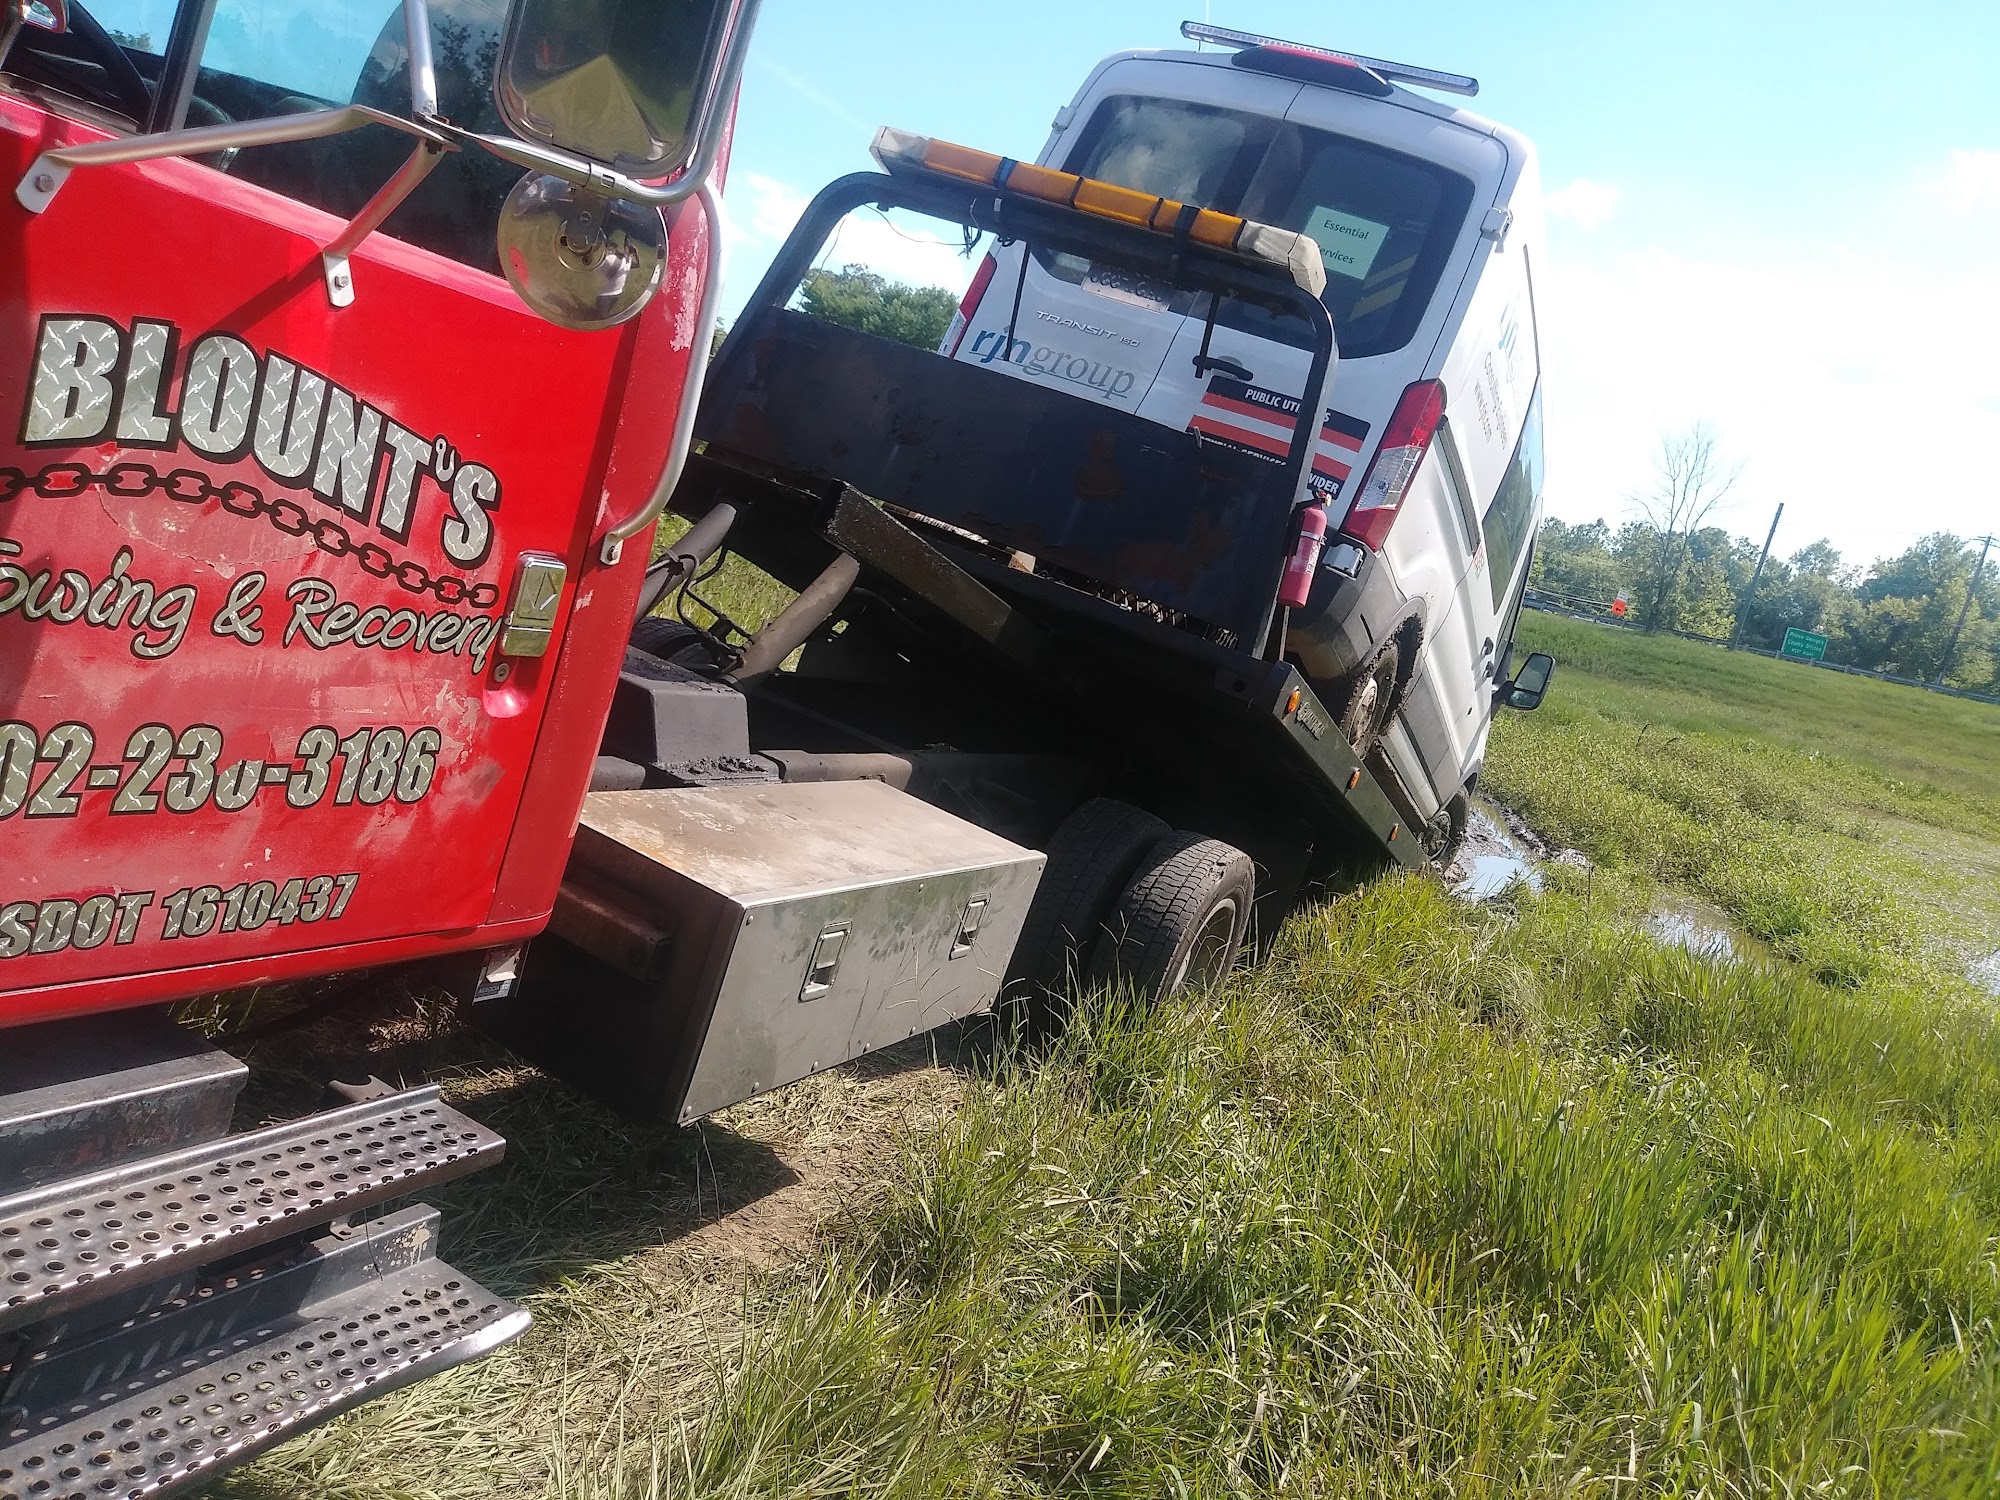 Blount's Towing Service 7901 Parston Dr Lot 3, Forestville Maryland 20747